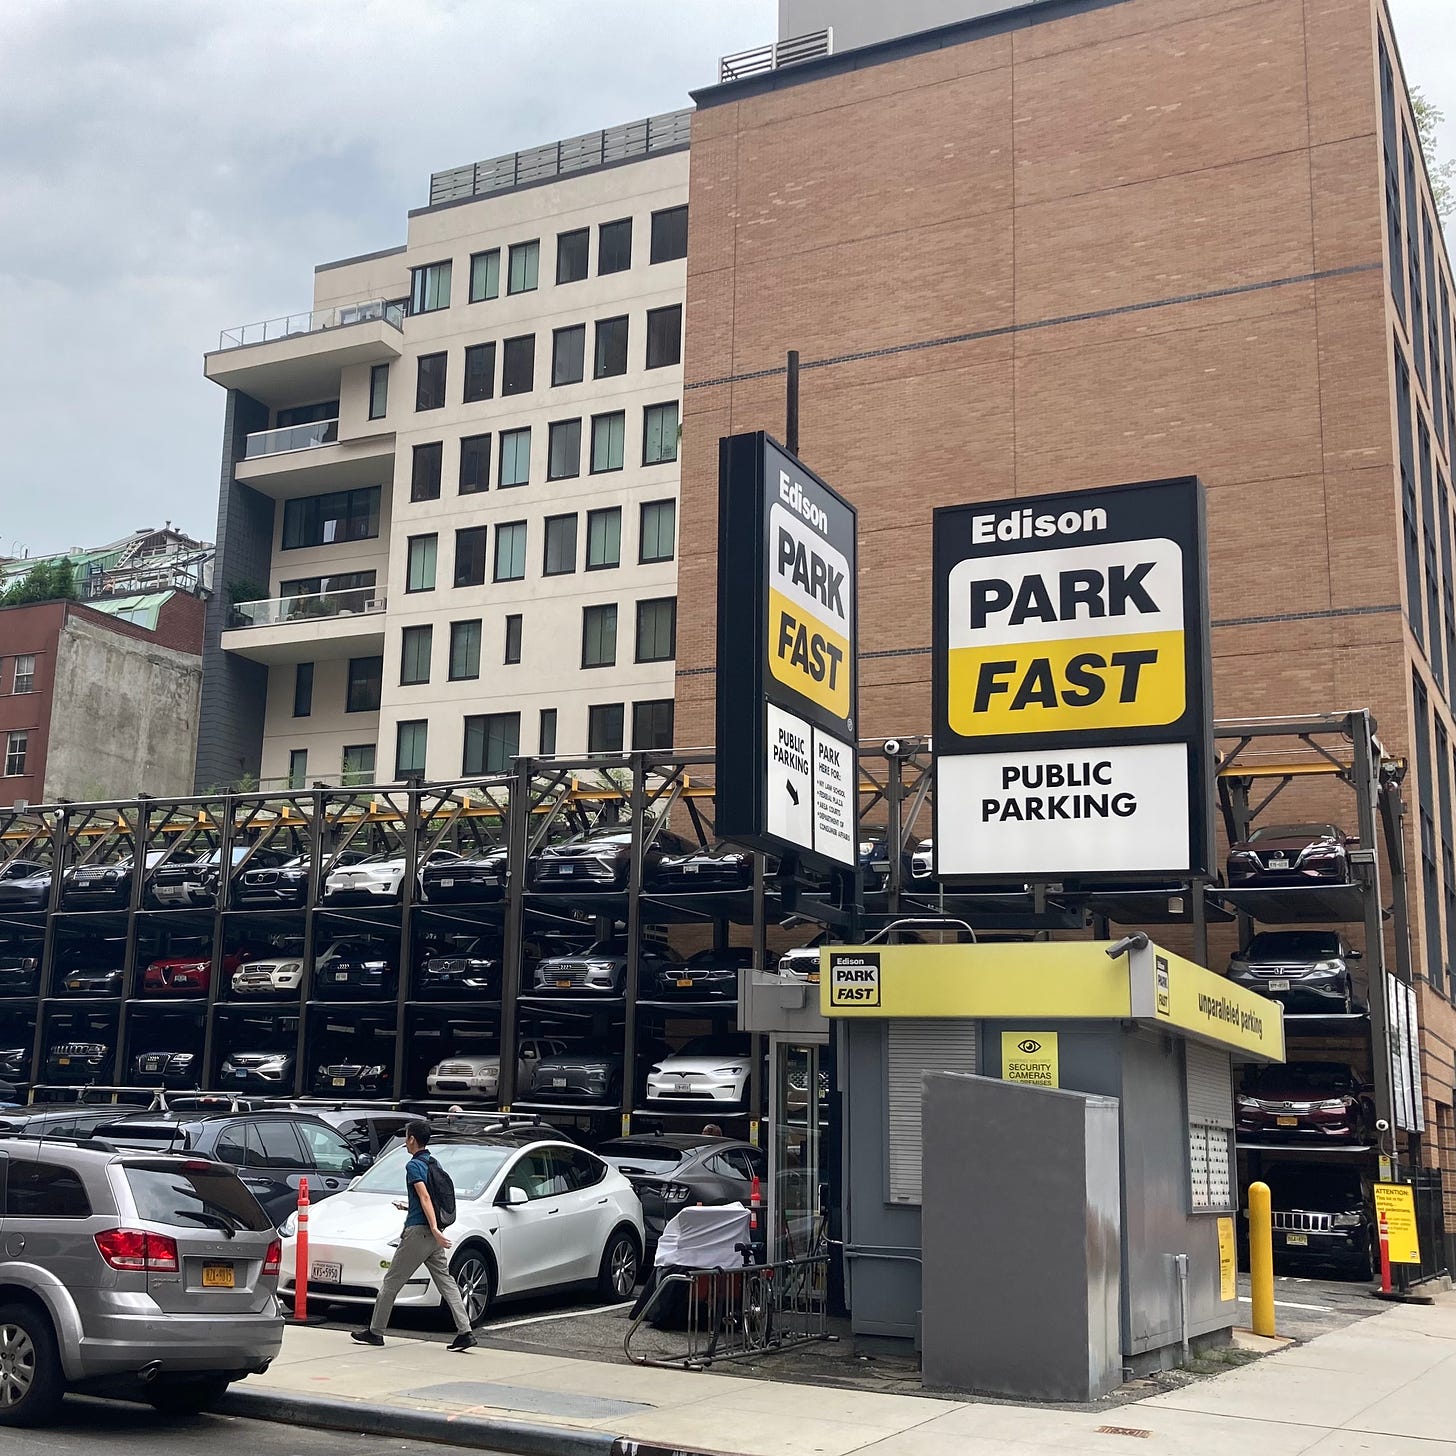 public parking lot with cars stacked in four rows